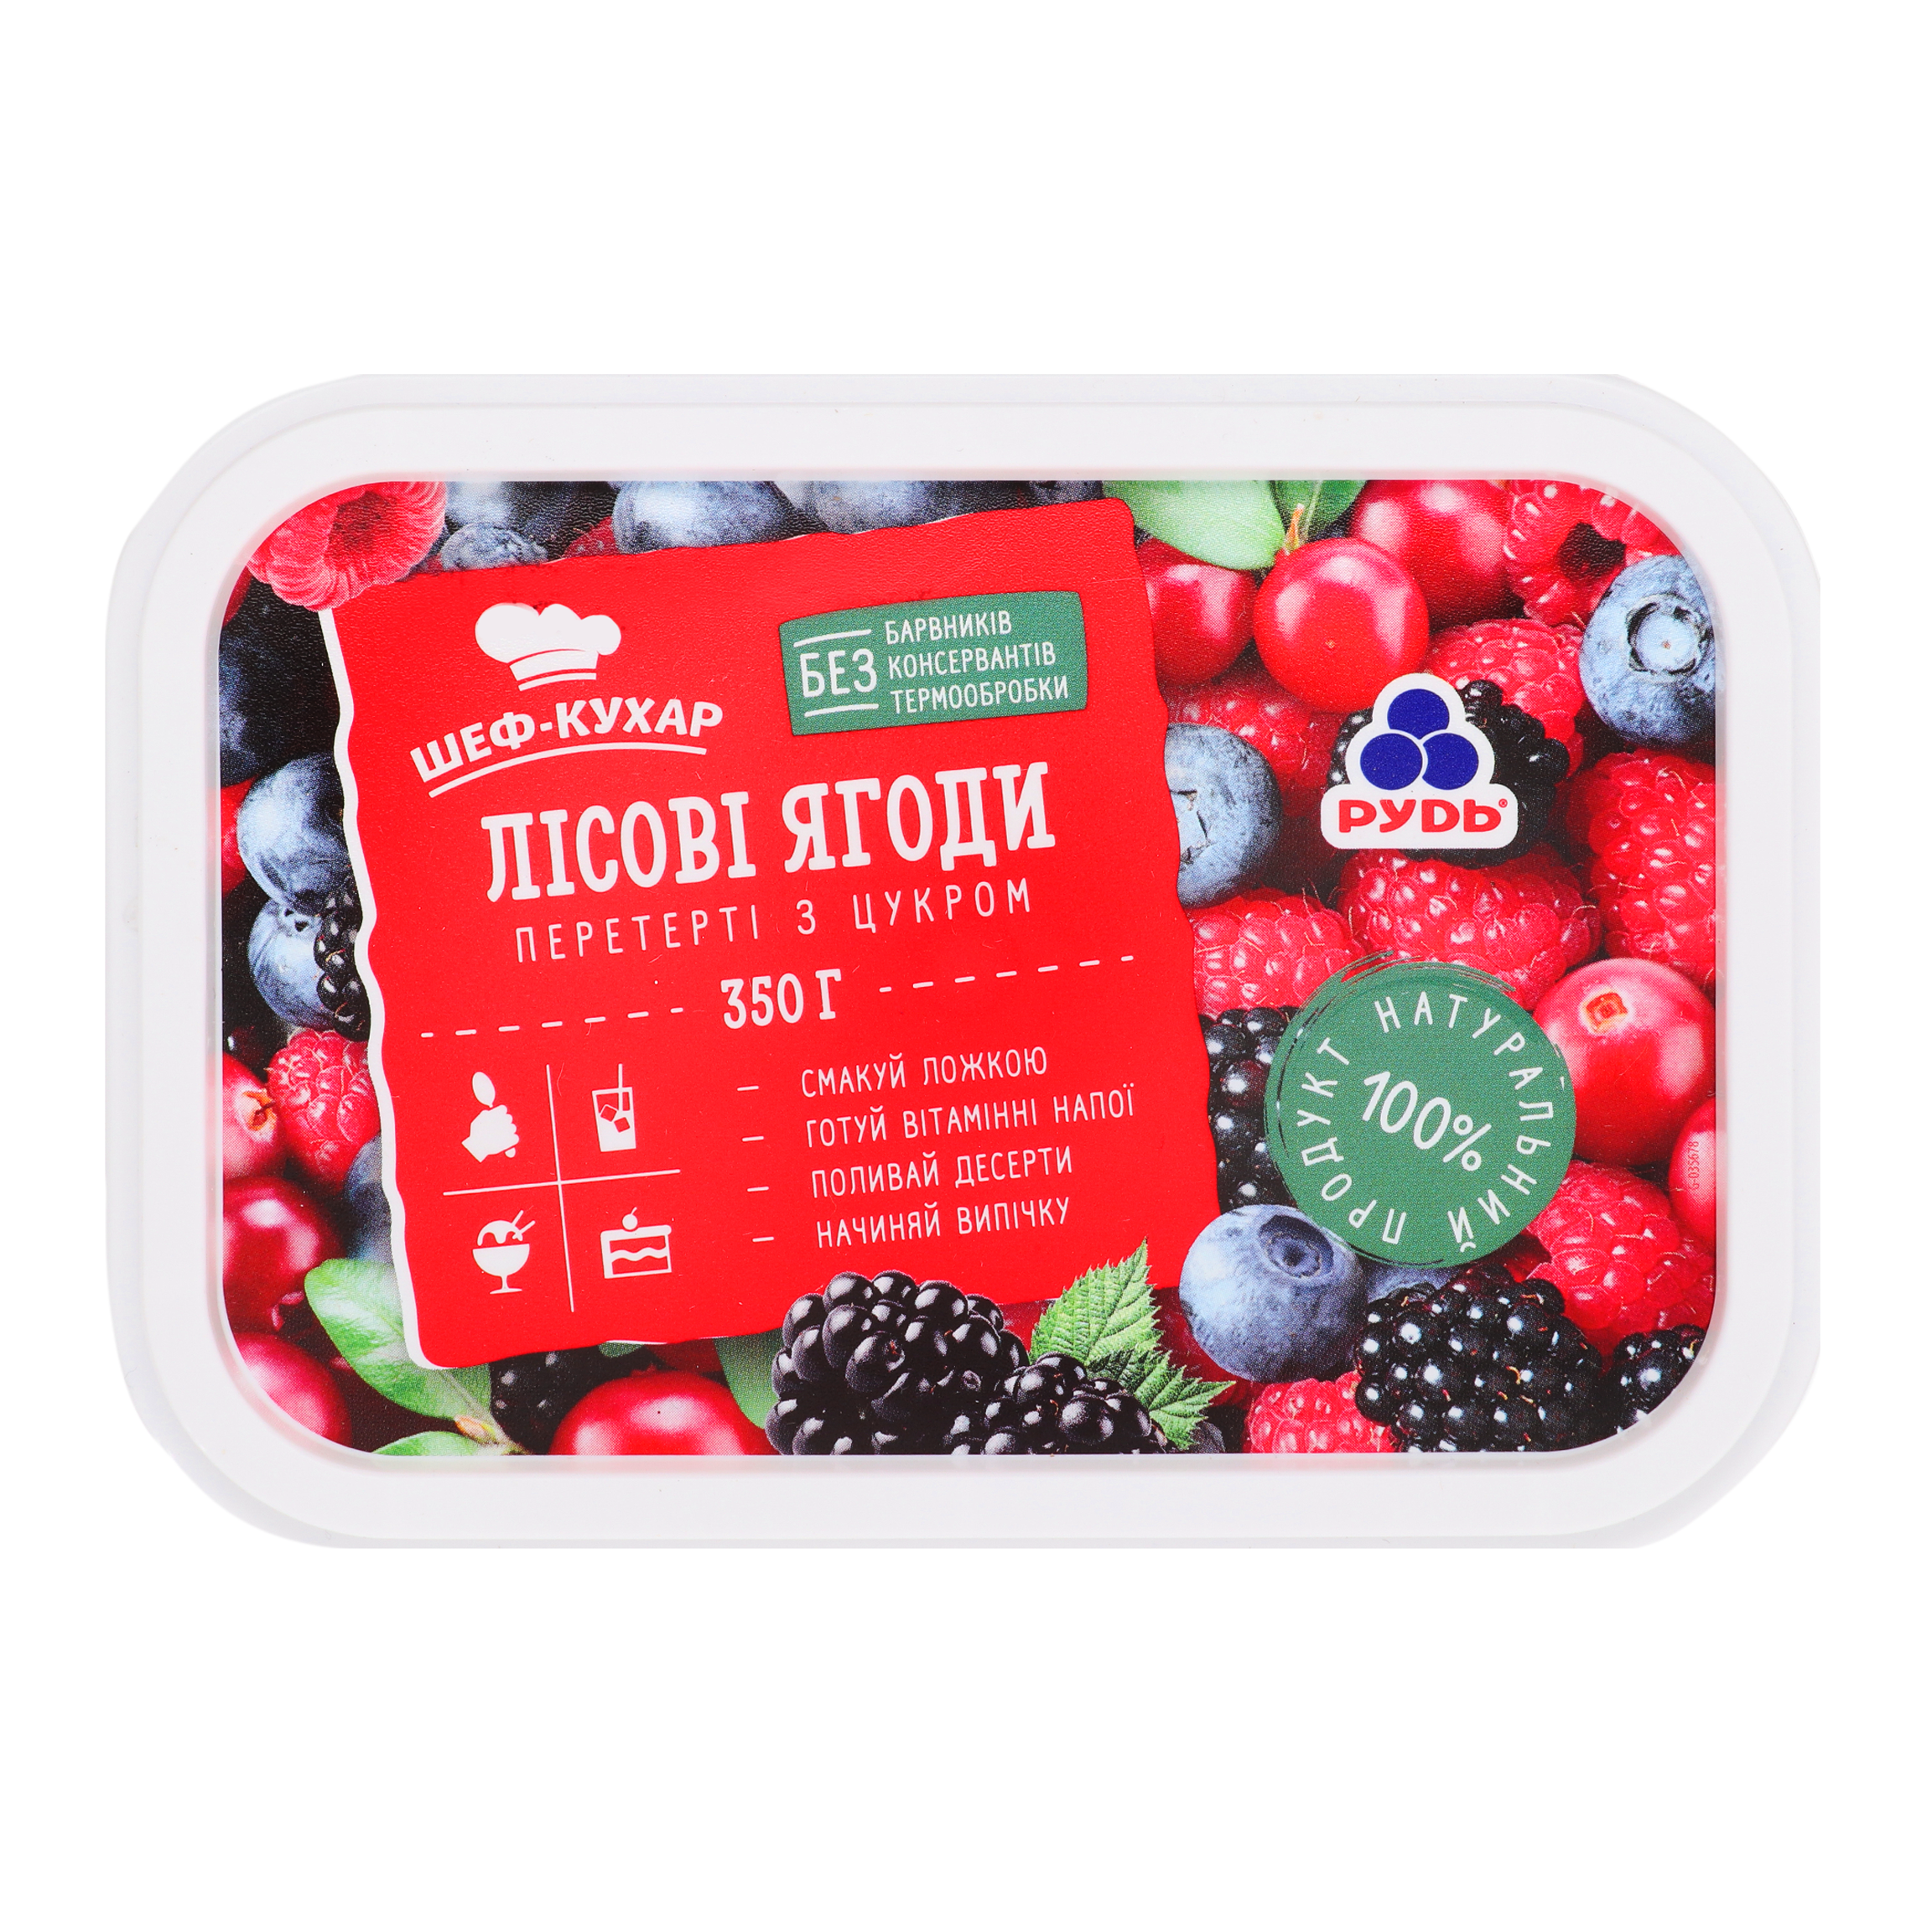 Rud forest berries mashed with sugar 350g